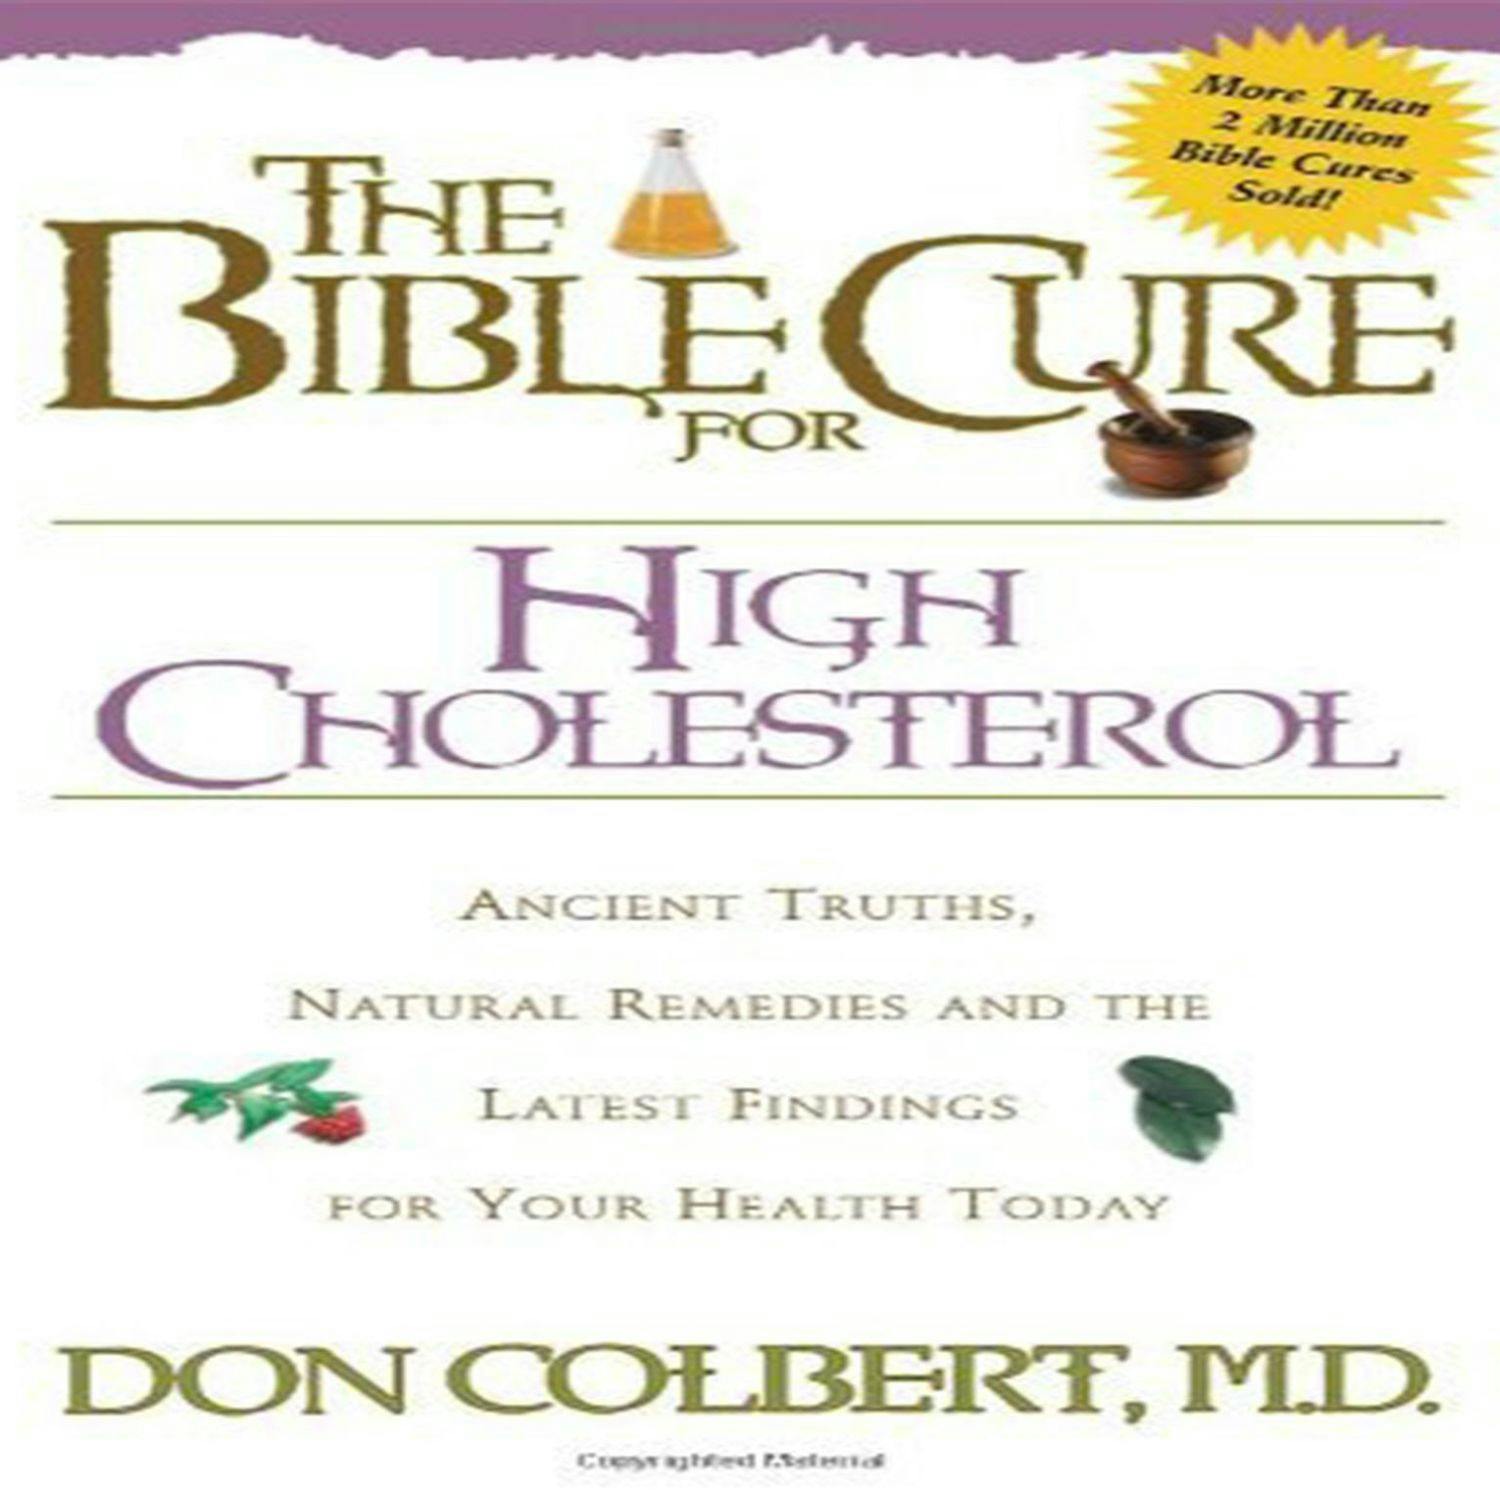 The Bible Cure for High Cholesterol: Ancient Truths, Natural Remedies, and the Latest Findings for Your Health Today - Don Colbert